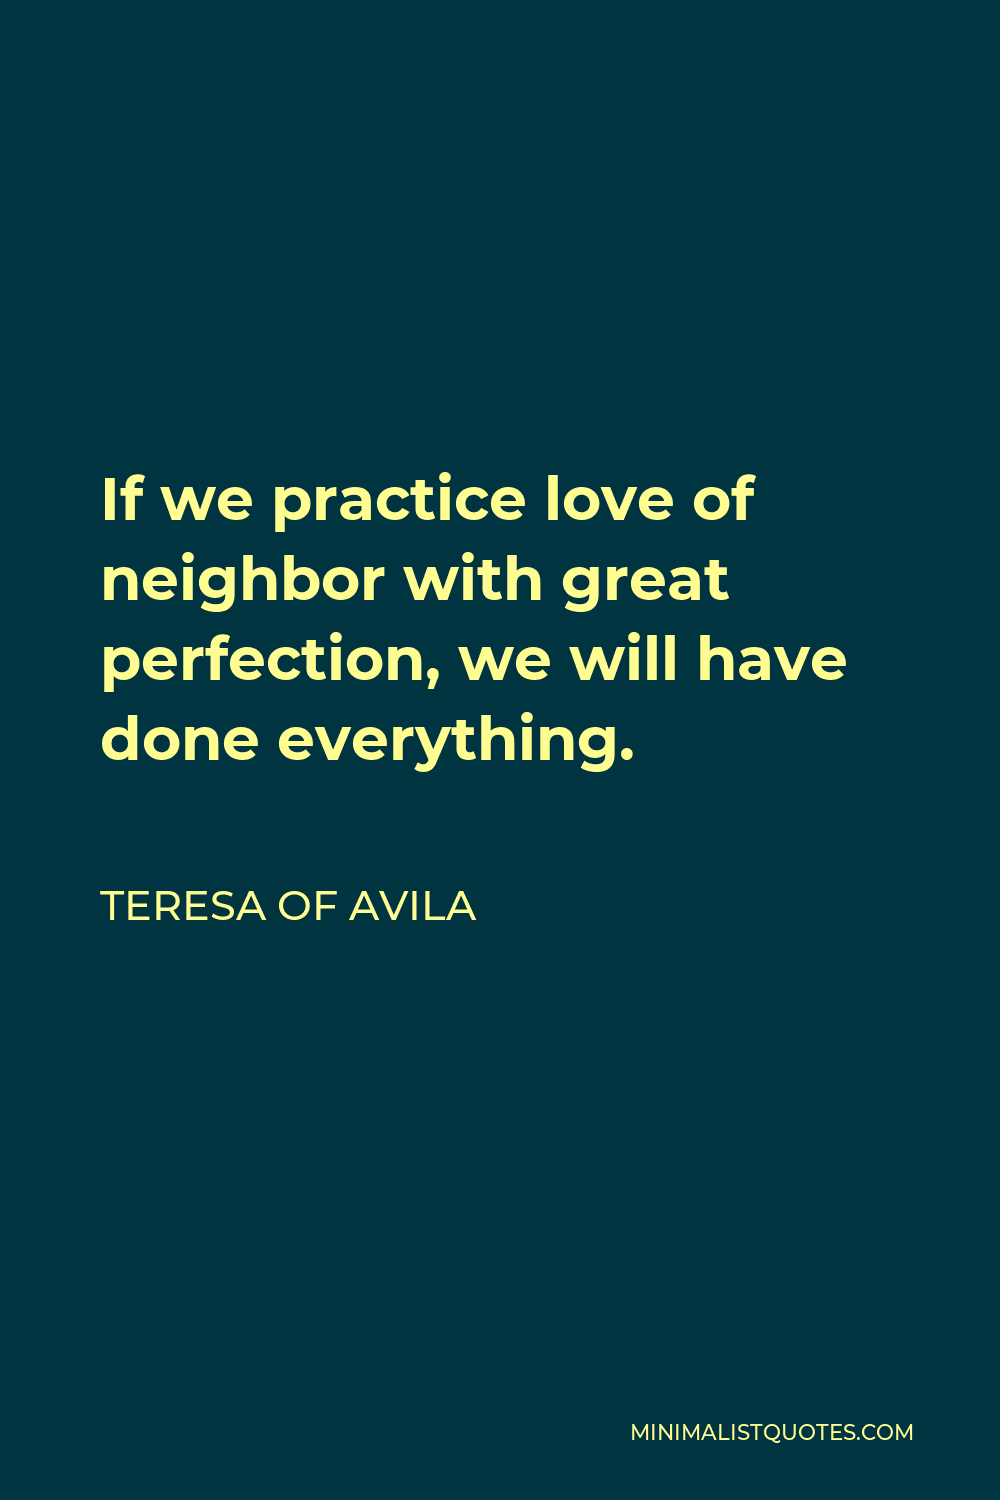 Teresa of Avila Quote - If we practice love of neighbor with great perfection, we will have done everything.